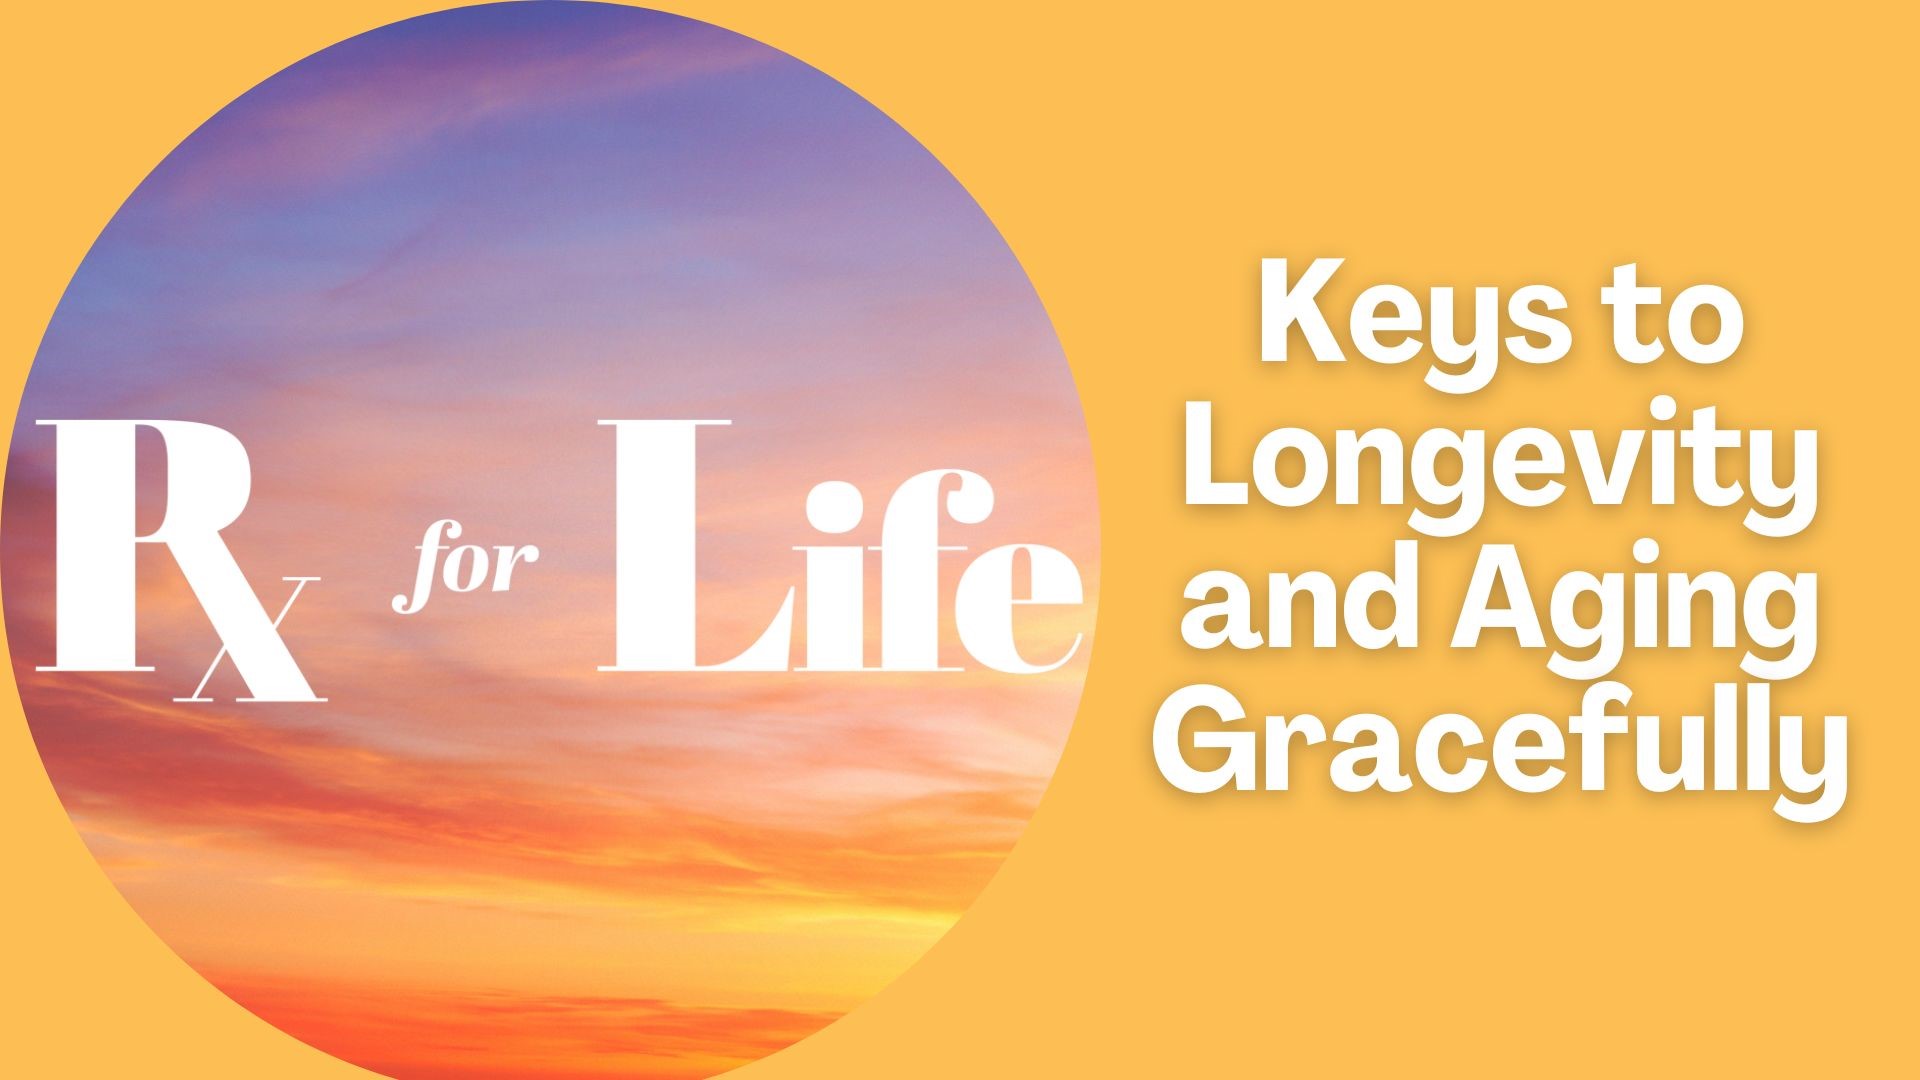 Monica Robins sits down with an expert to talk about the keys to aging gracefully, plus the non-surgical procedure to help deal with getting older.